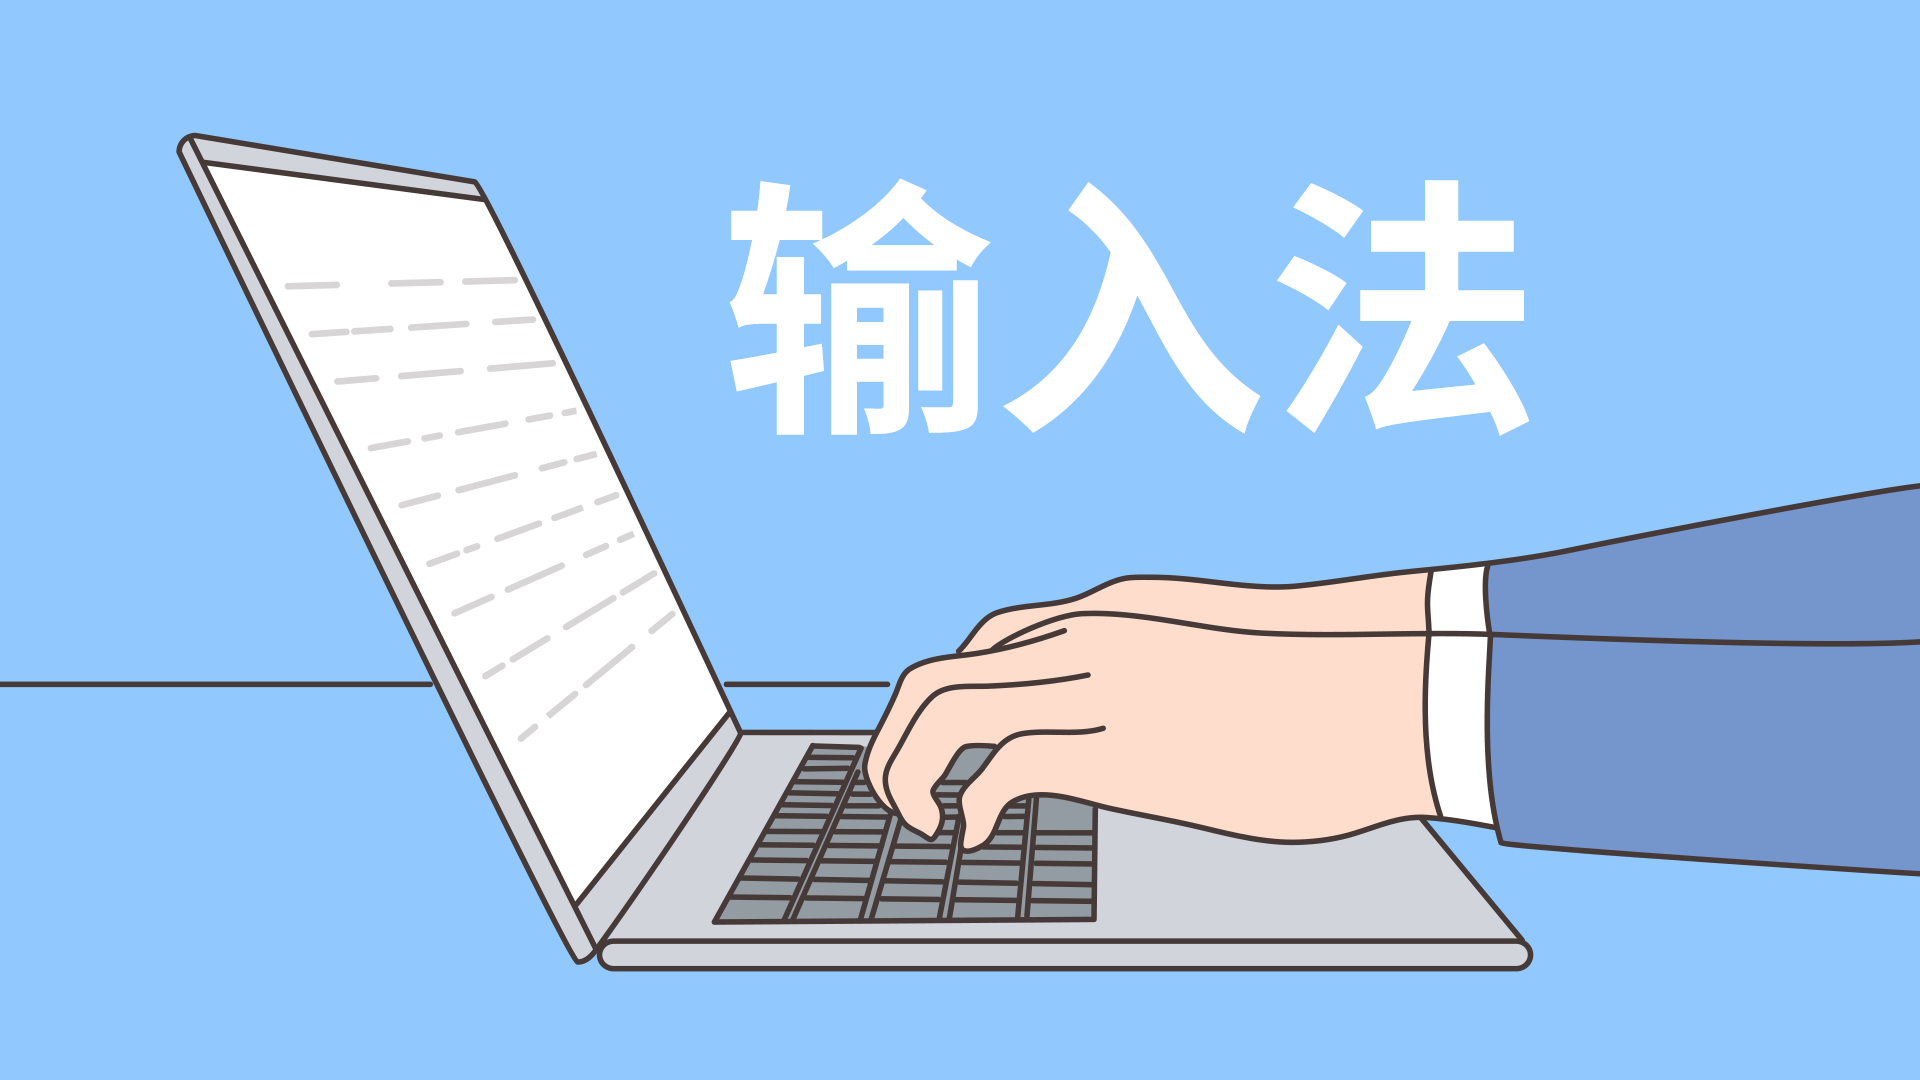 Vector image of hands typing on a laptop with a blue background, representing typing Chinese characters on any system